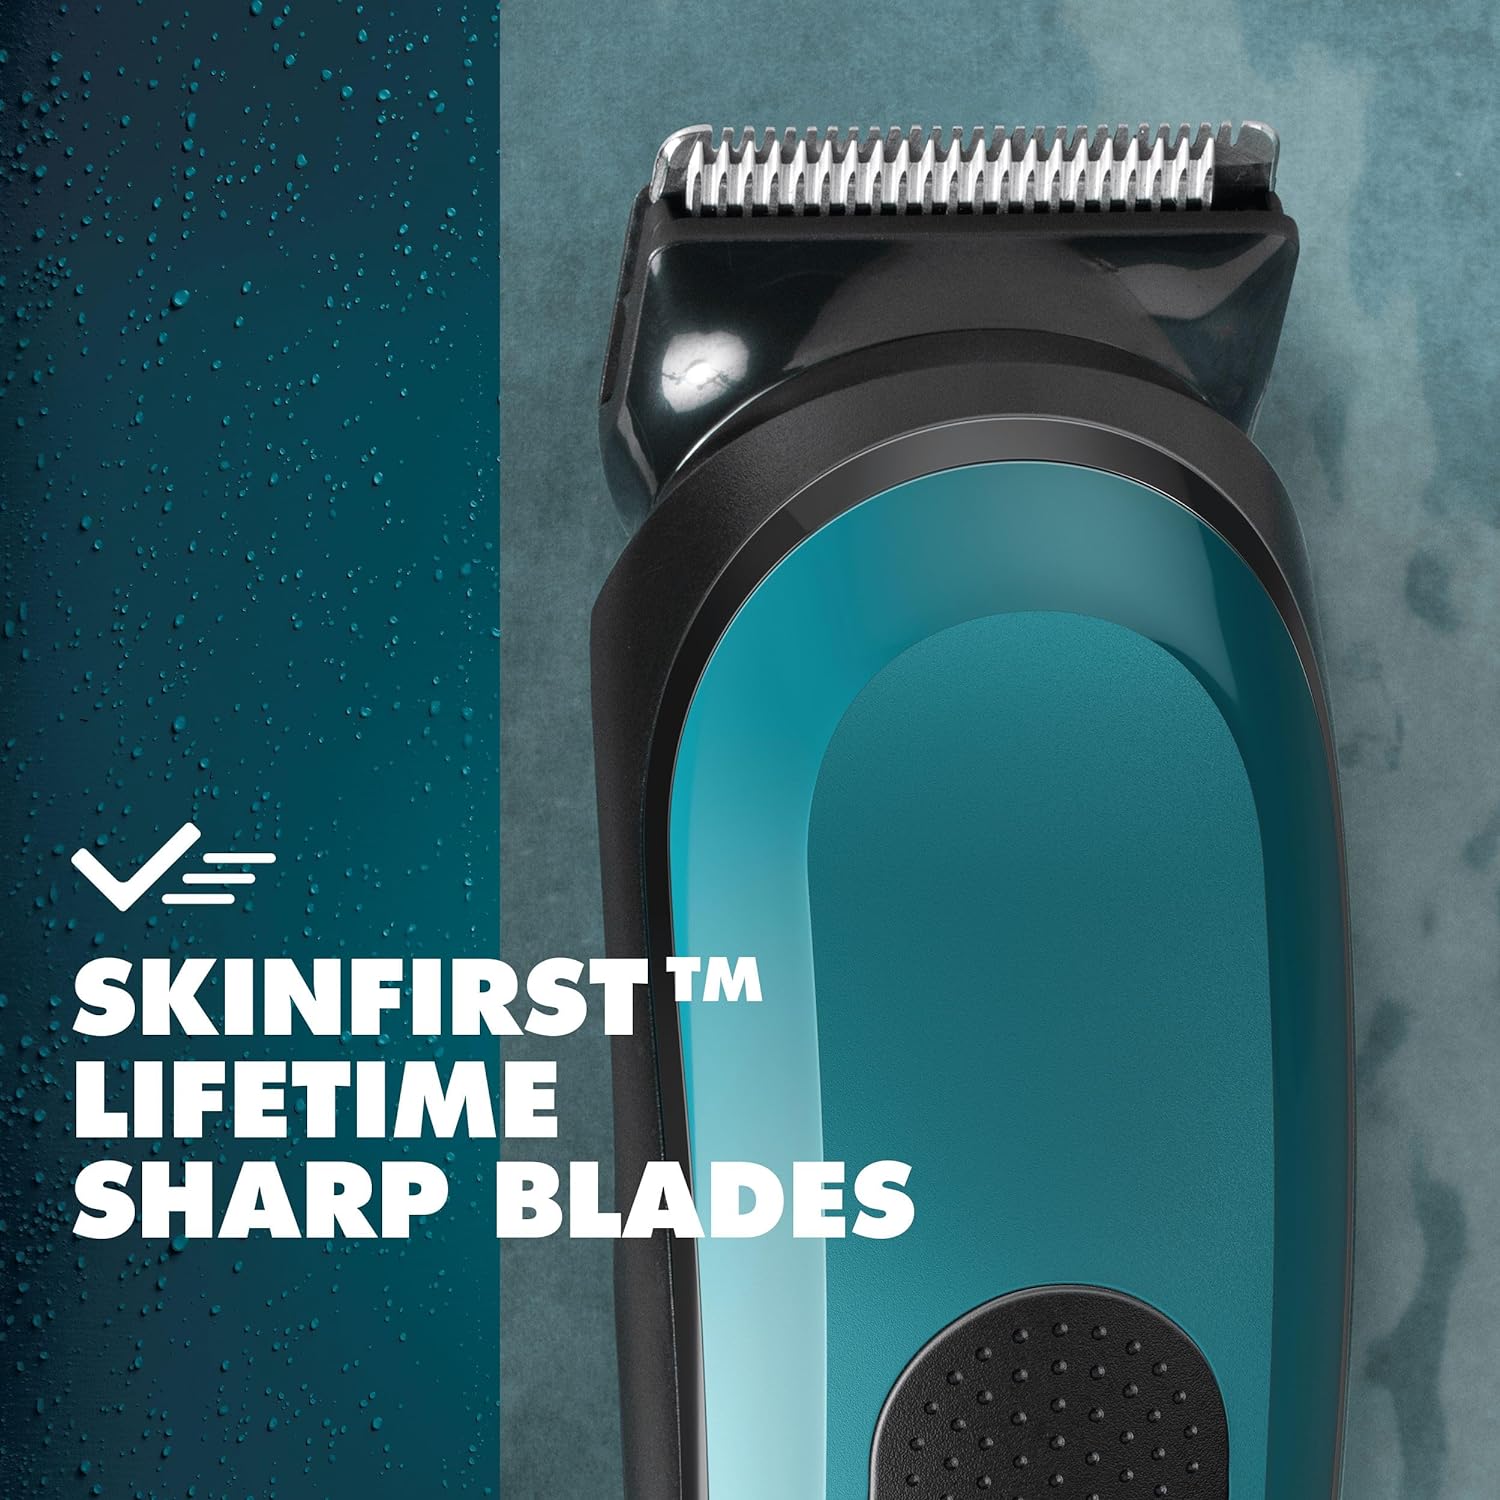 Gillette Intimate i3 Men’s Trimmer , SkinFirst Pubic Hair Trimmer for Men, Waterproof, Cordless - Wet & Dry